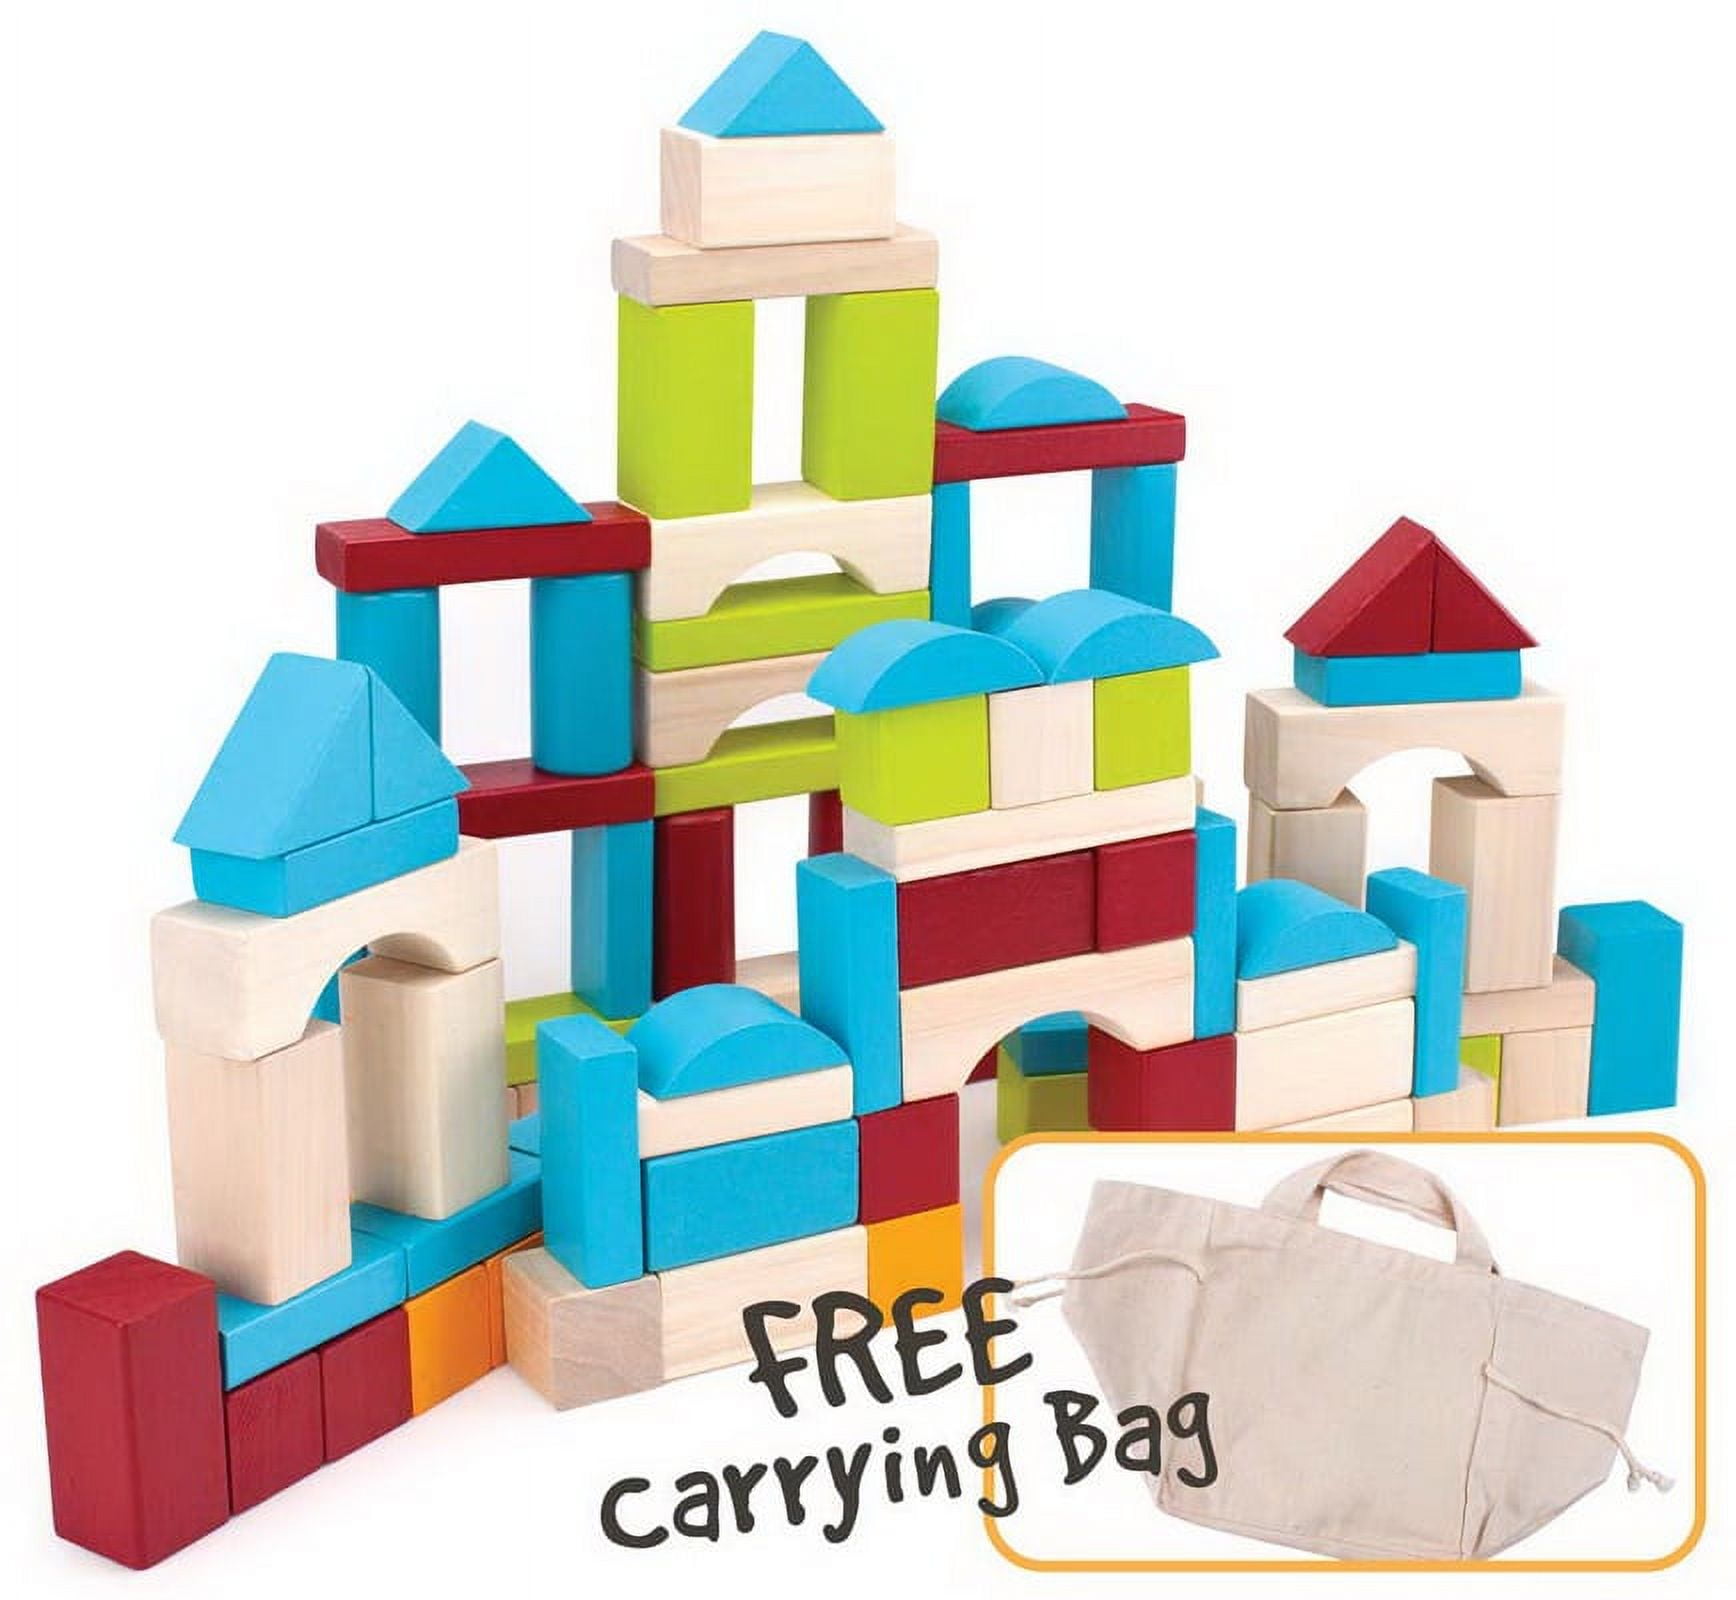 Picture of Brybelly Holdings TCDG-002 Wooden Block Set with Carrying Bag - 100 Piece